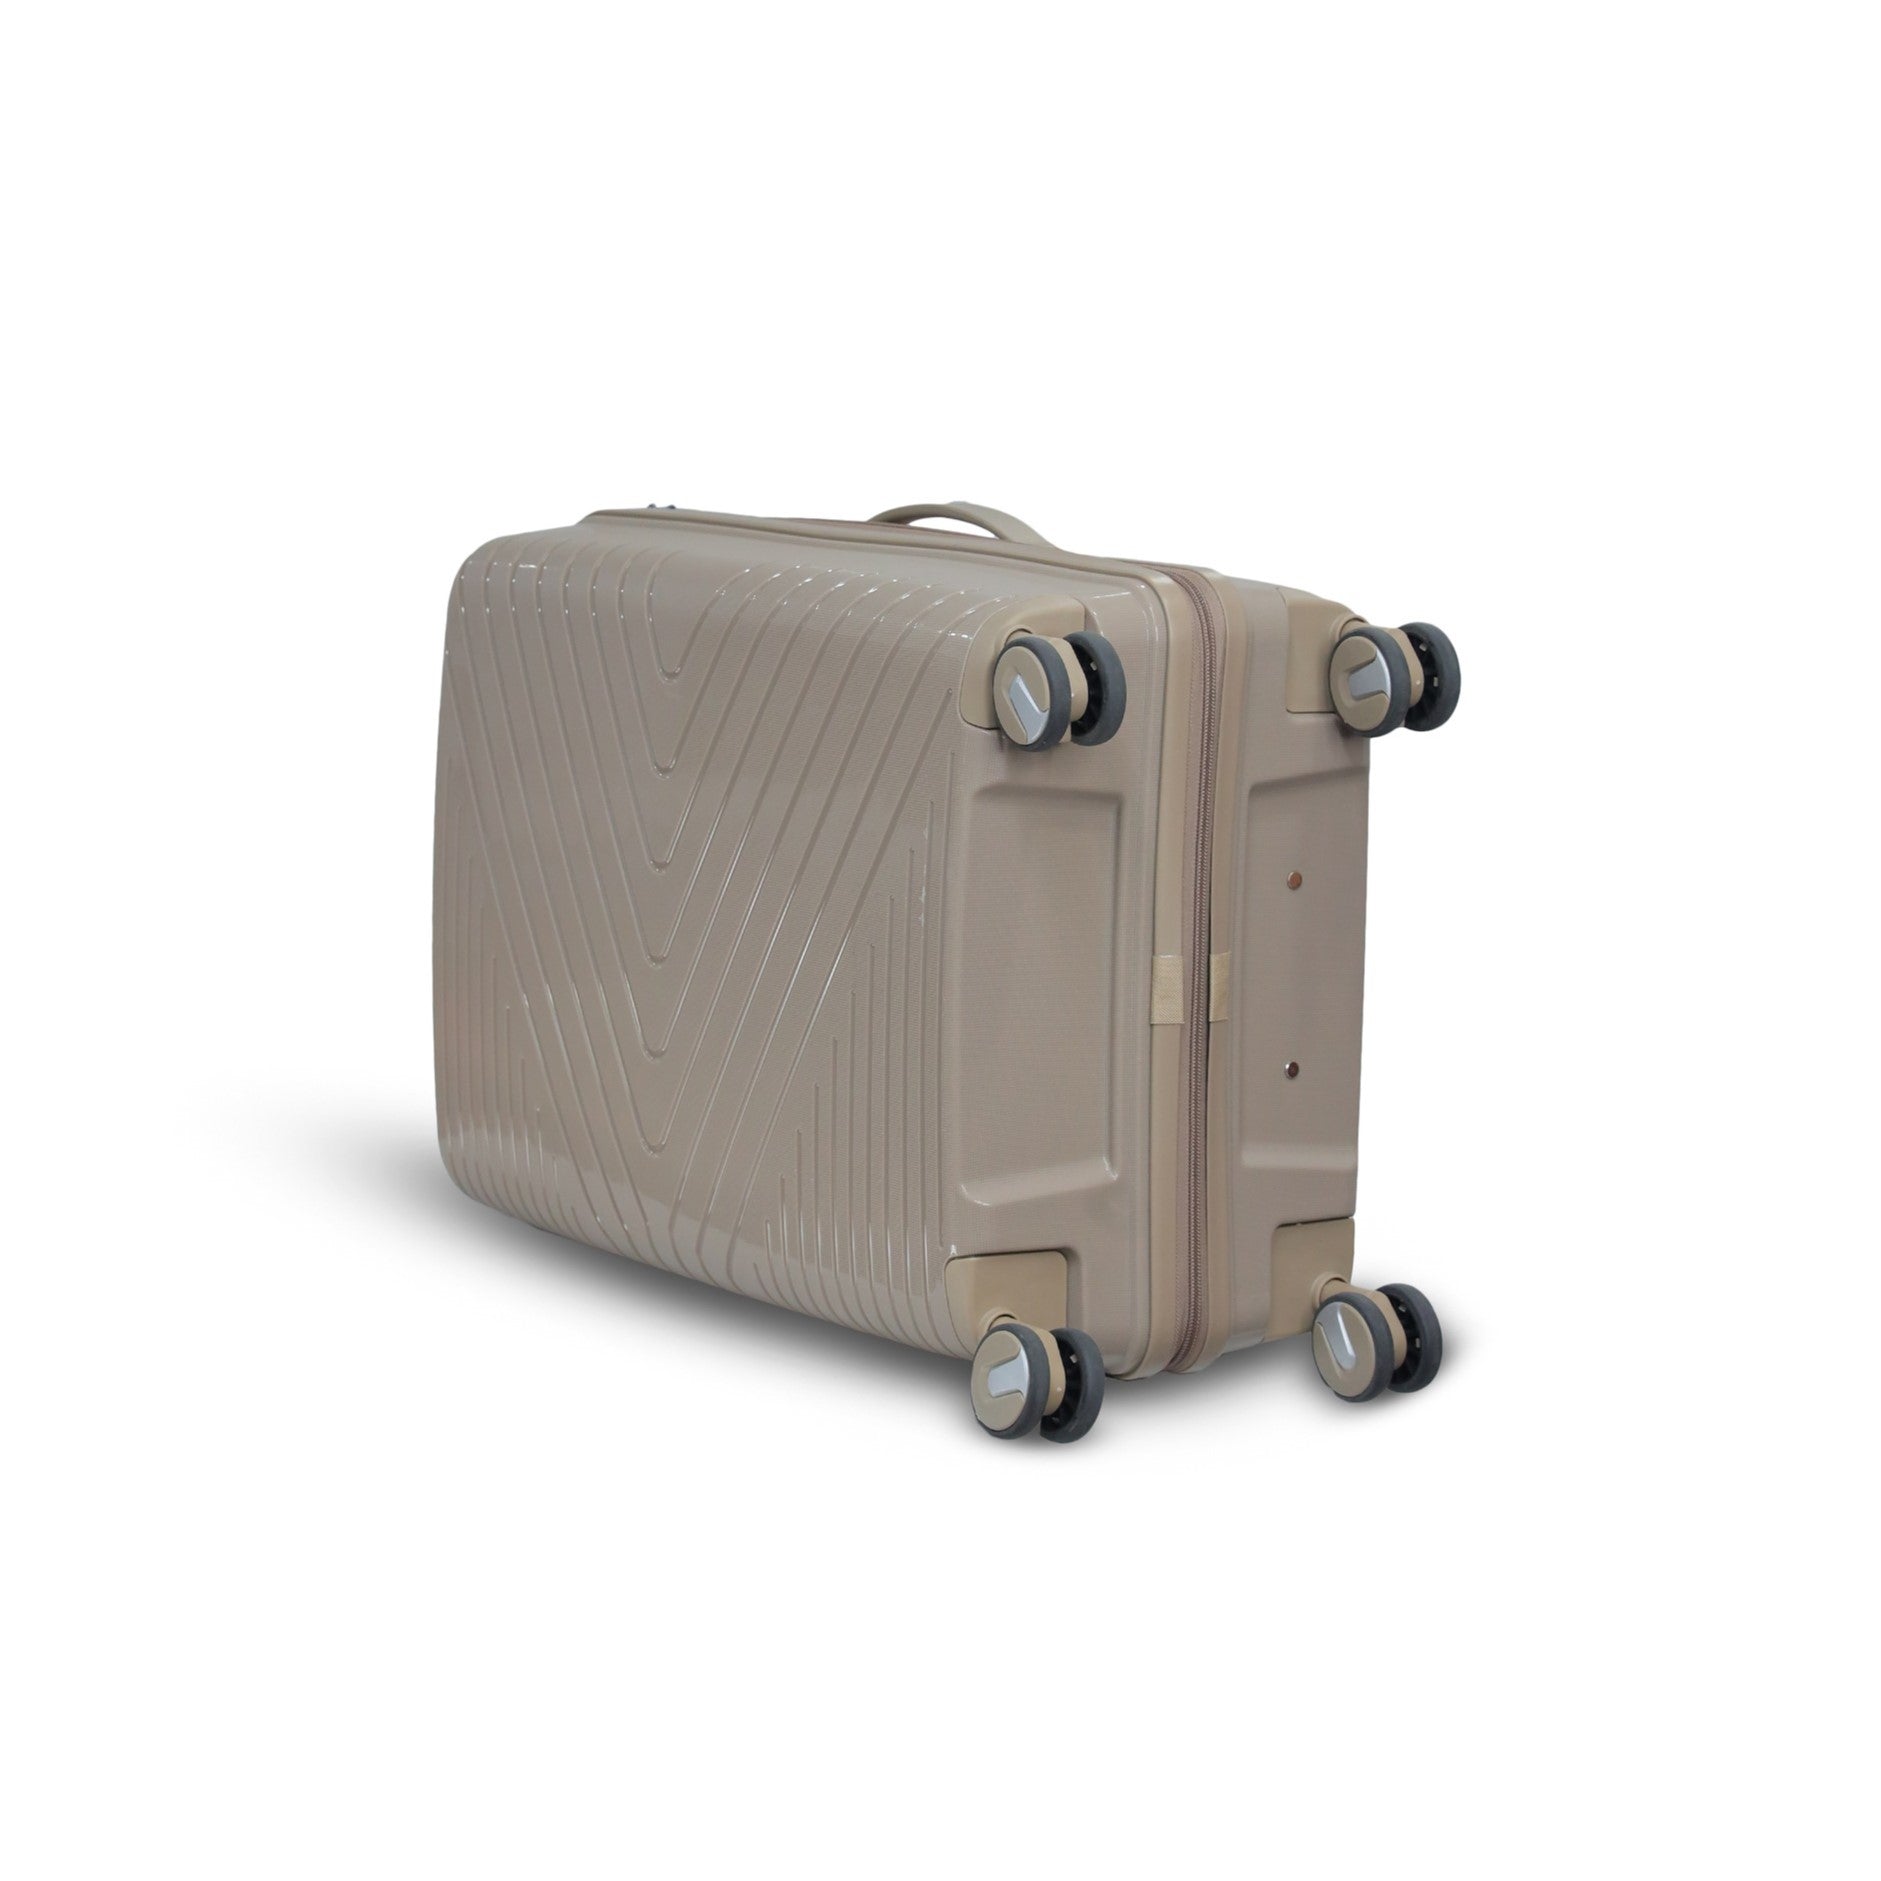 3 Piece Set 20" 24" 28 Inches Beige Crossline PP Unbreakable Luggage Bag With Double Spinner Wheel